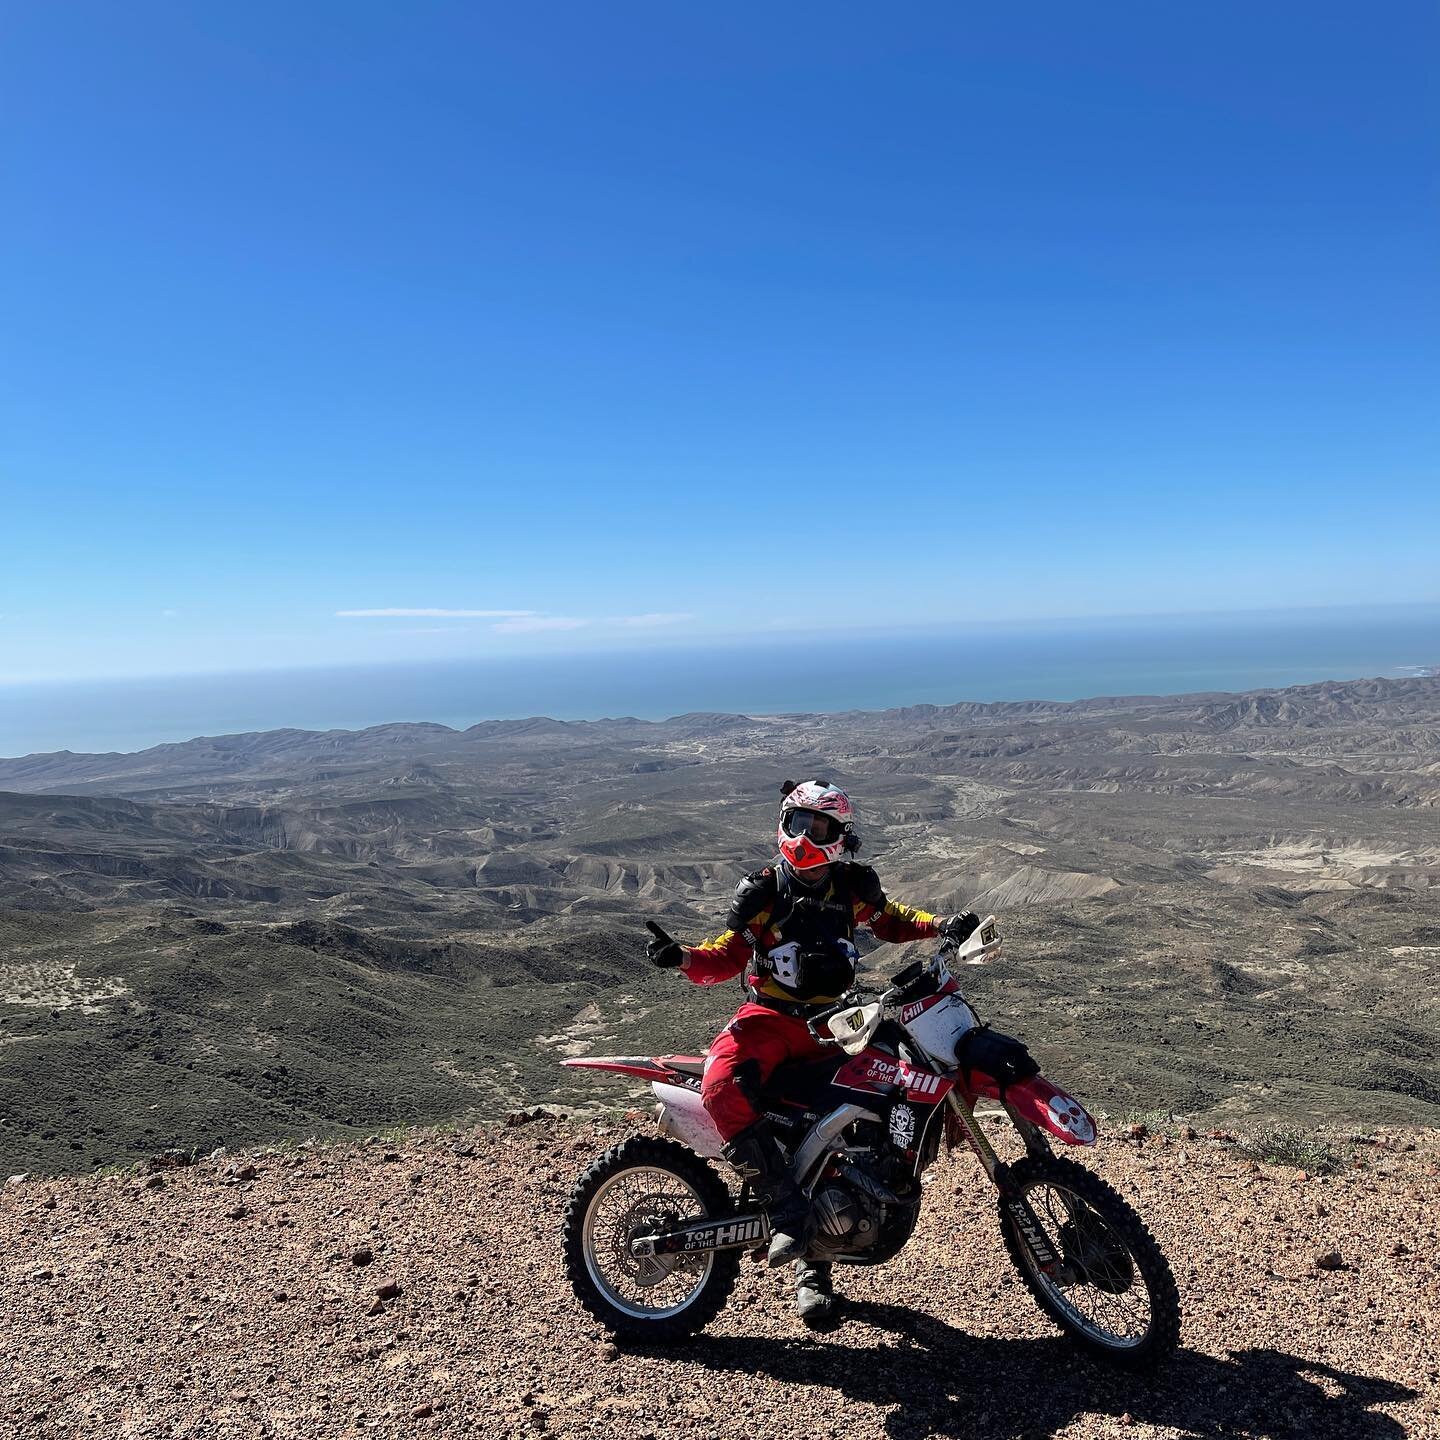 Some pictures from our epic adventure last week on the No Wimps in Baja ride.